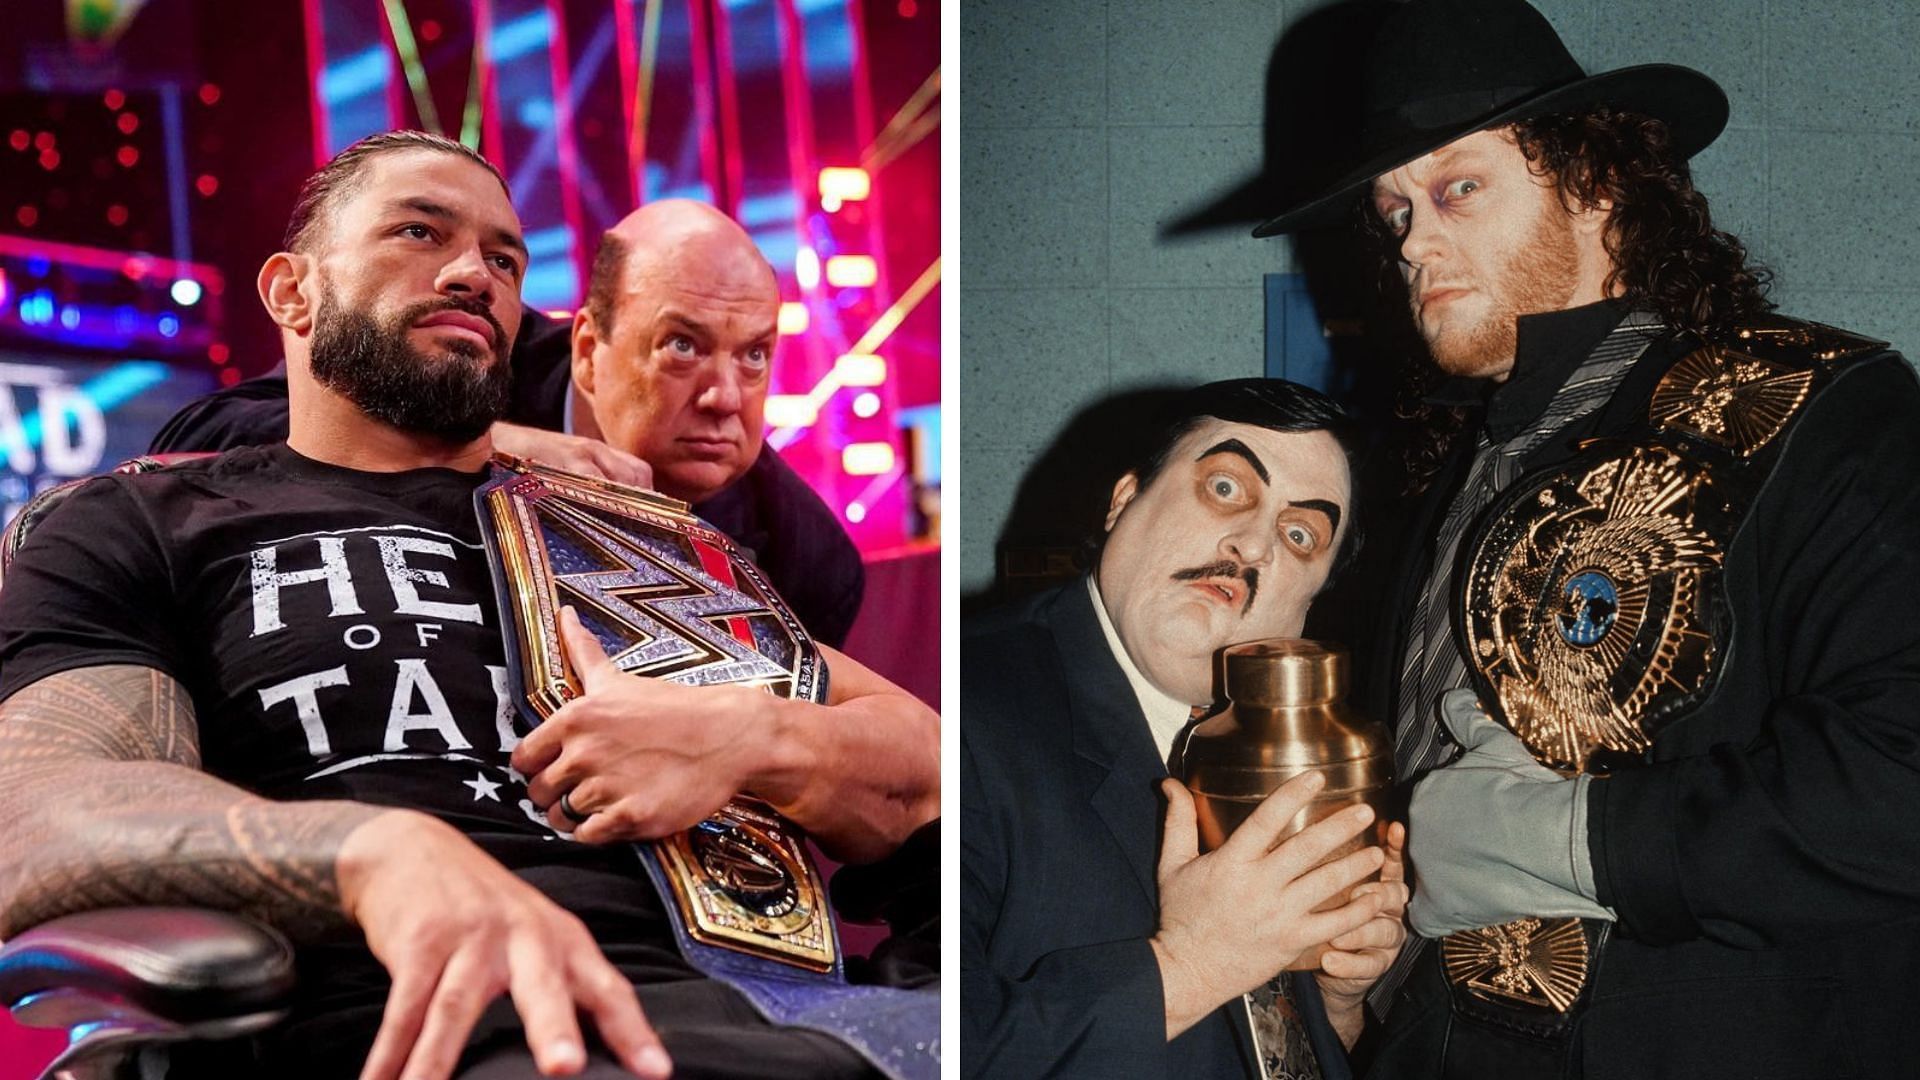 Roman Reigns and The Undertaker both had families in WWE